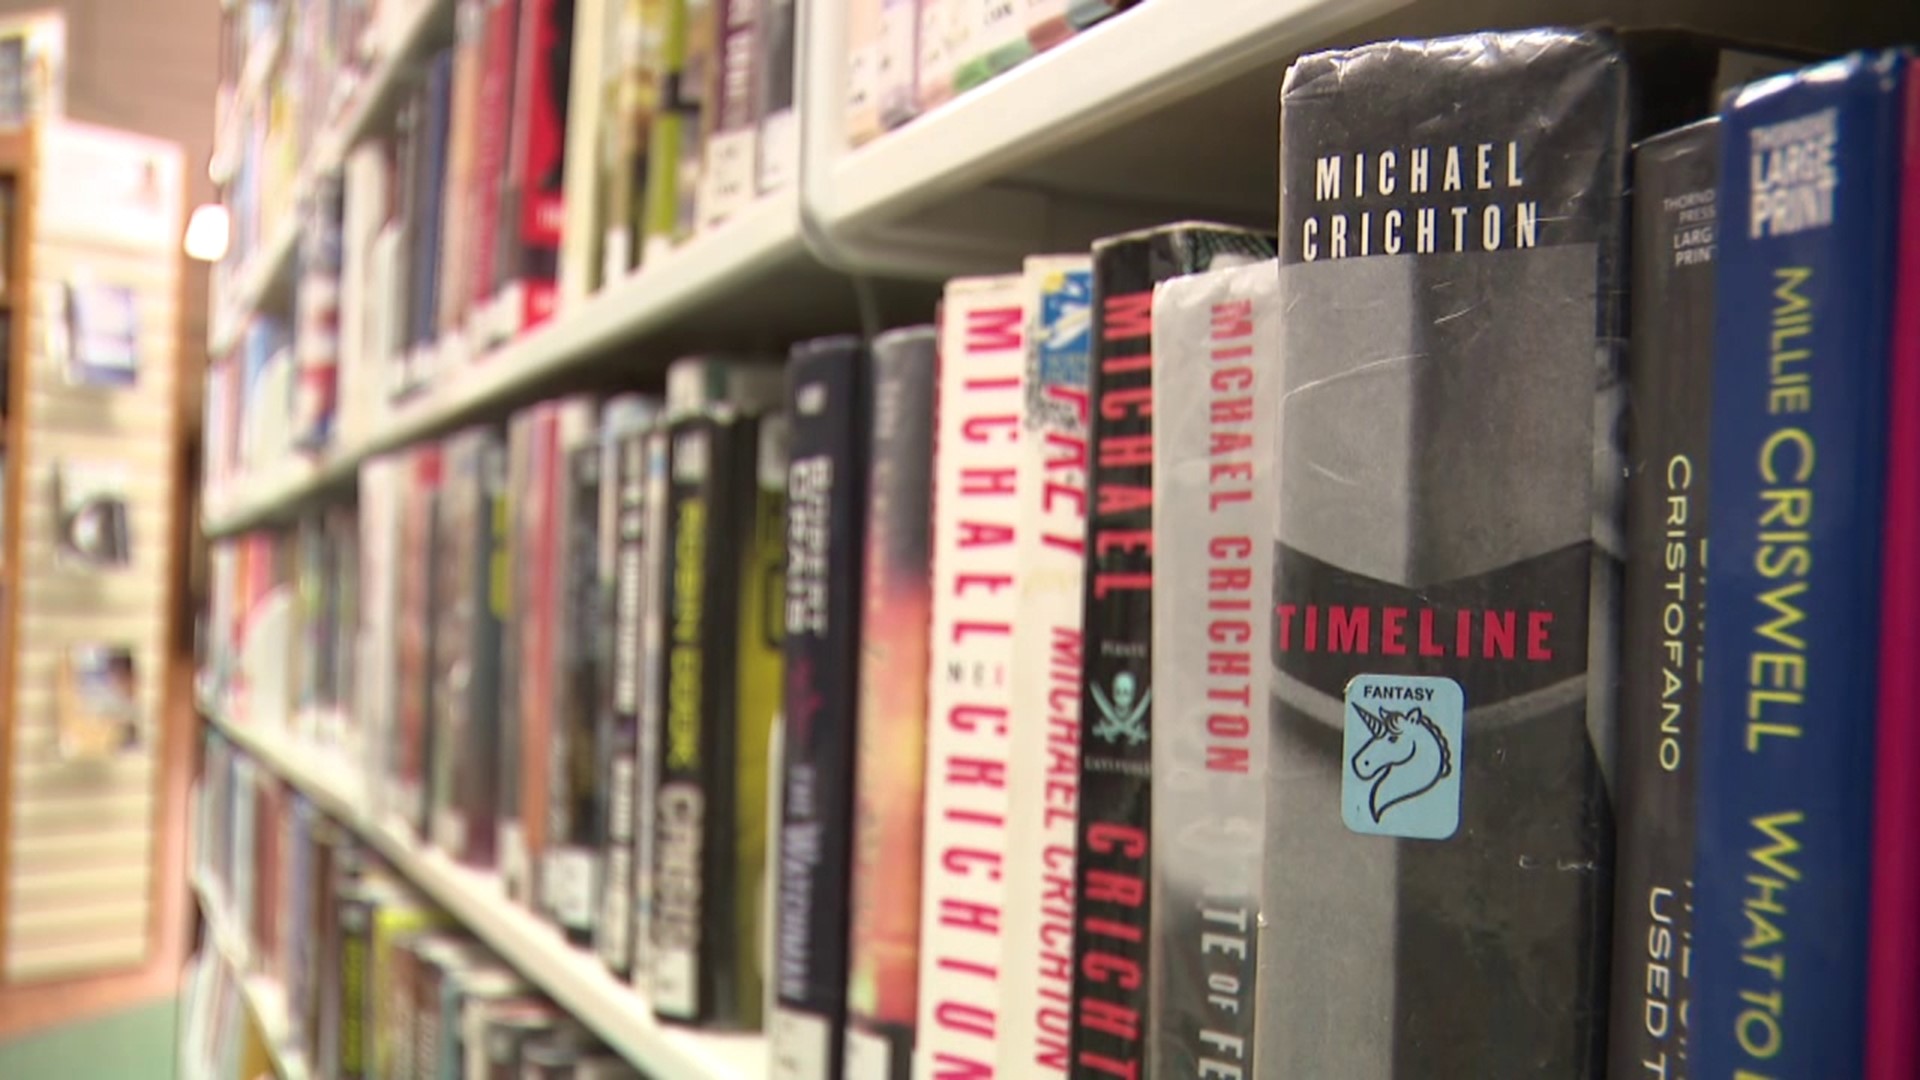 Libraries across the state are dropping overdue fines, including the Eastern Monroe Public Library.